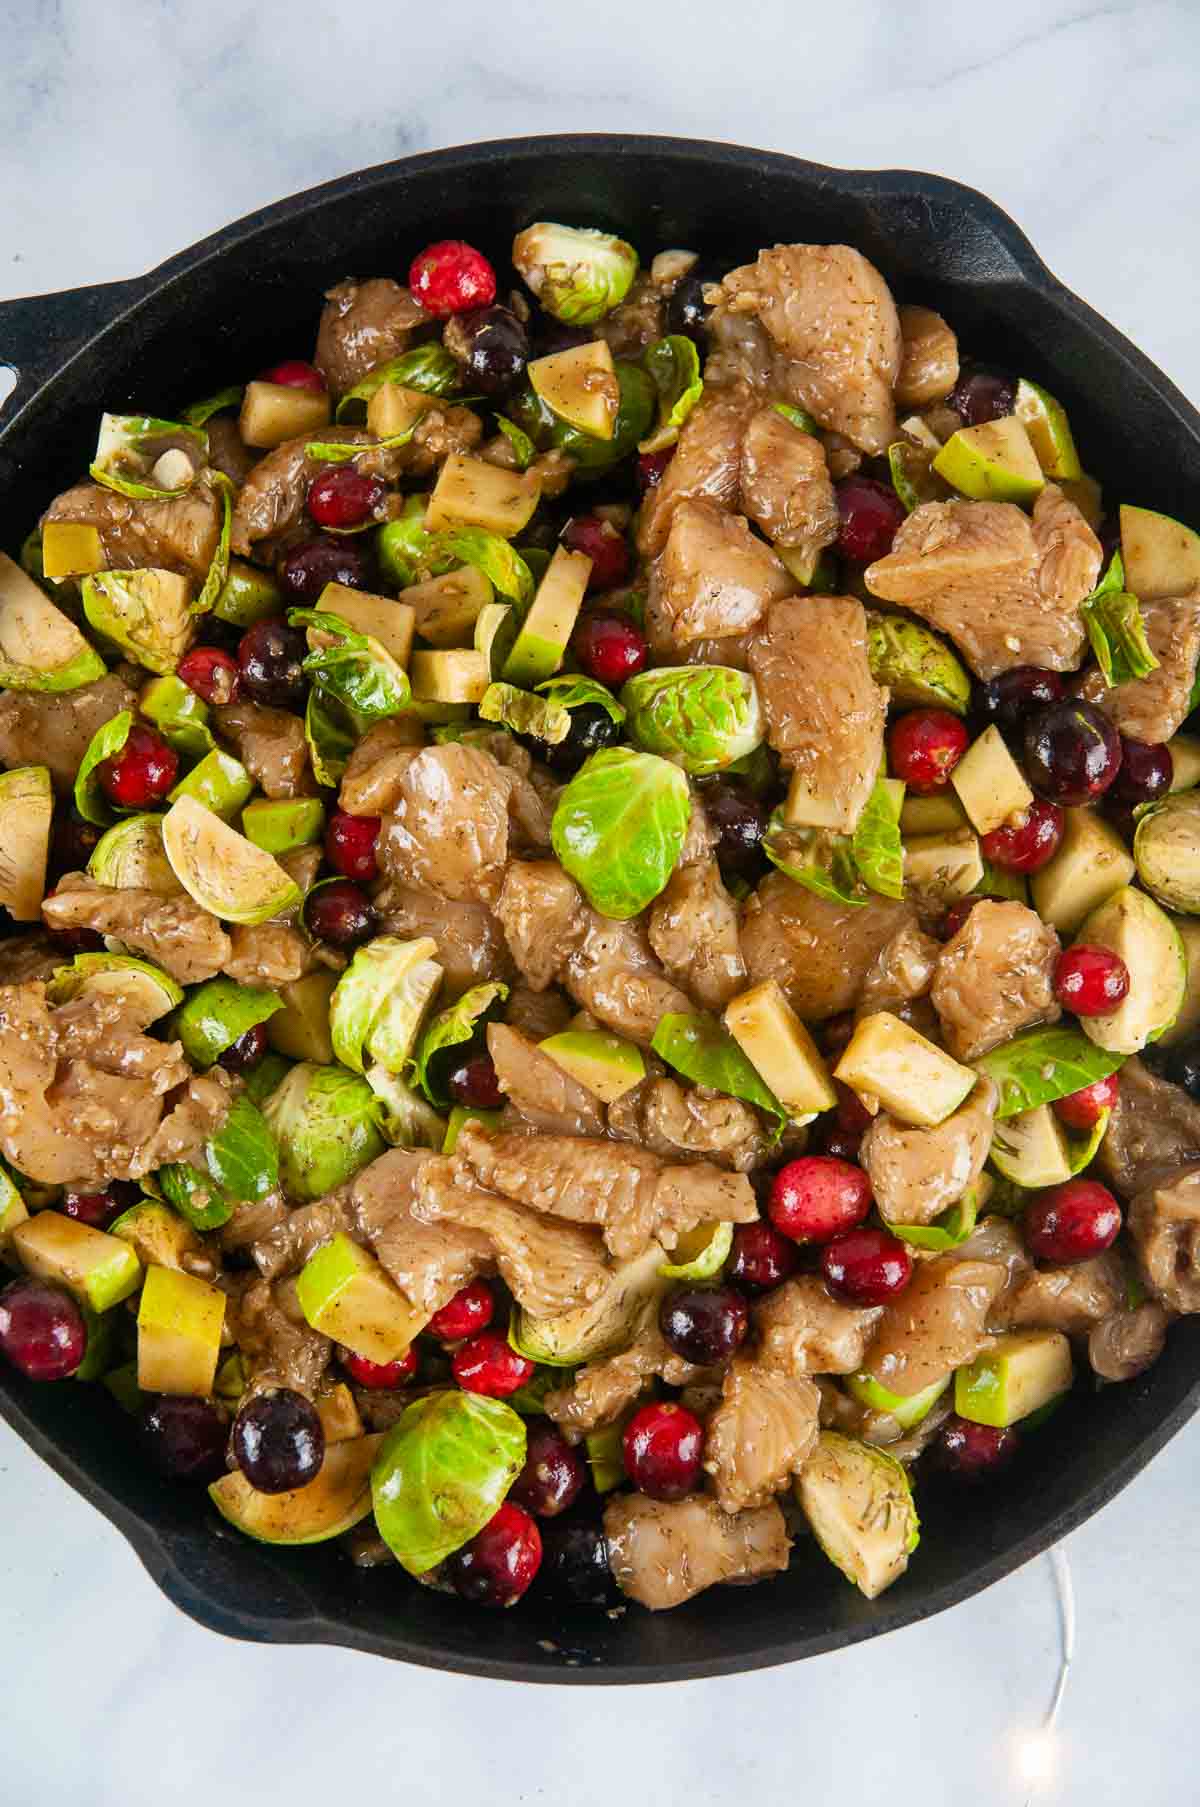 Pour the cranberry chicken mixture onto the rice in the skillet.